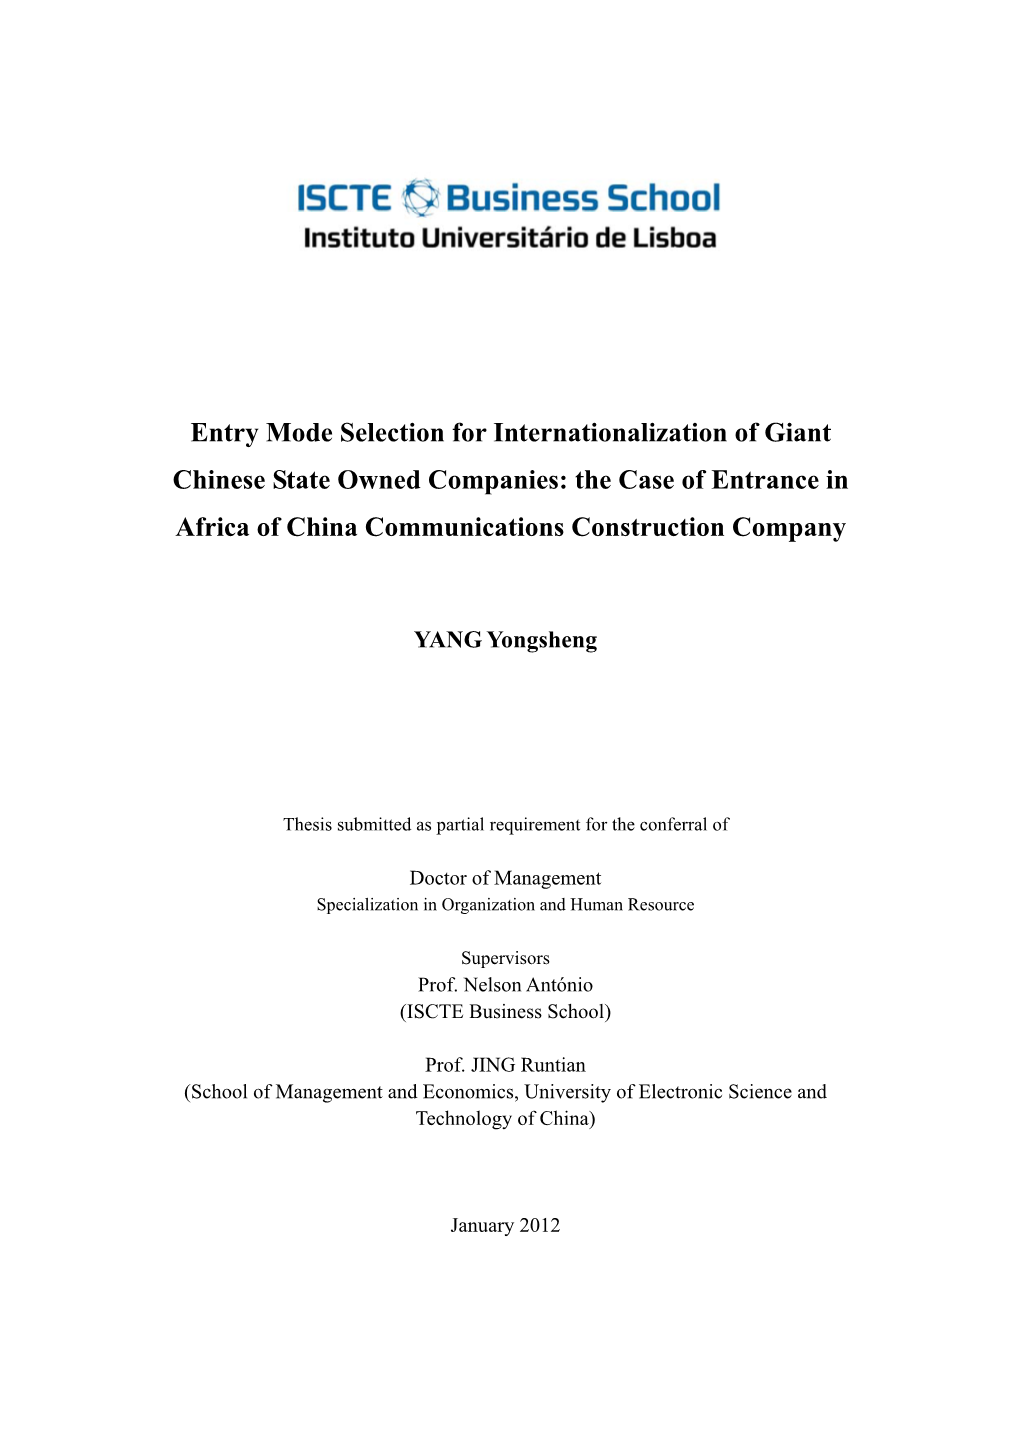 Entry Mode Selection for Internationalization of Giant Chinese State Owned Companies: the Case of Entrance in Africa of China Communications Construction Company